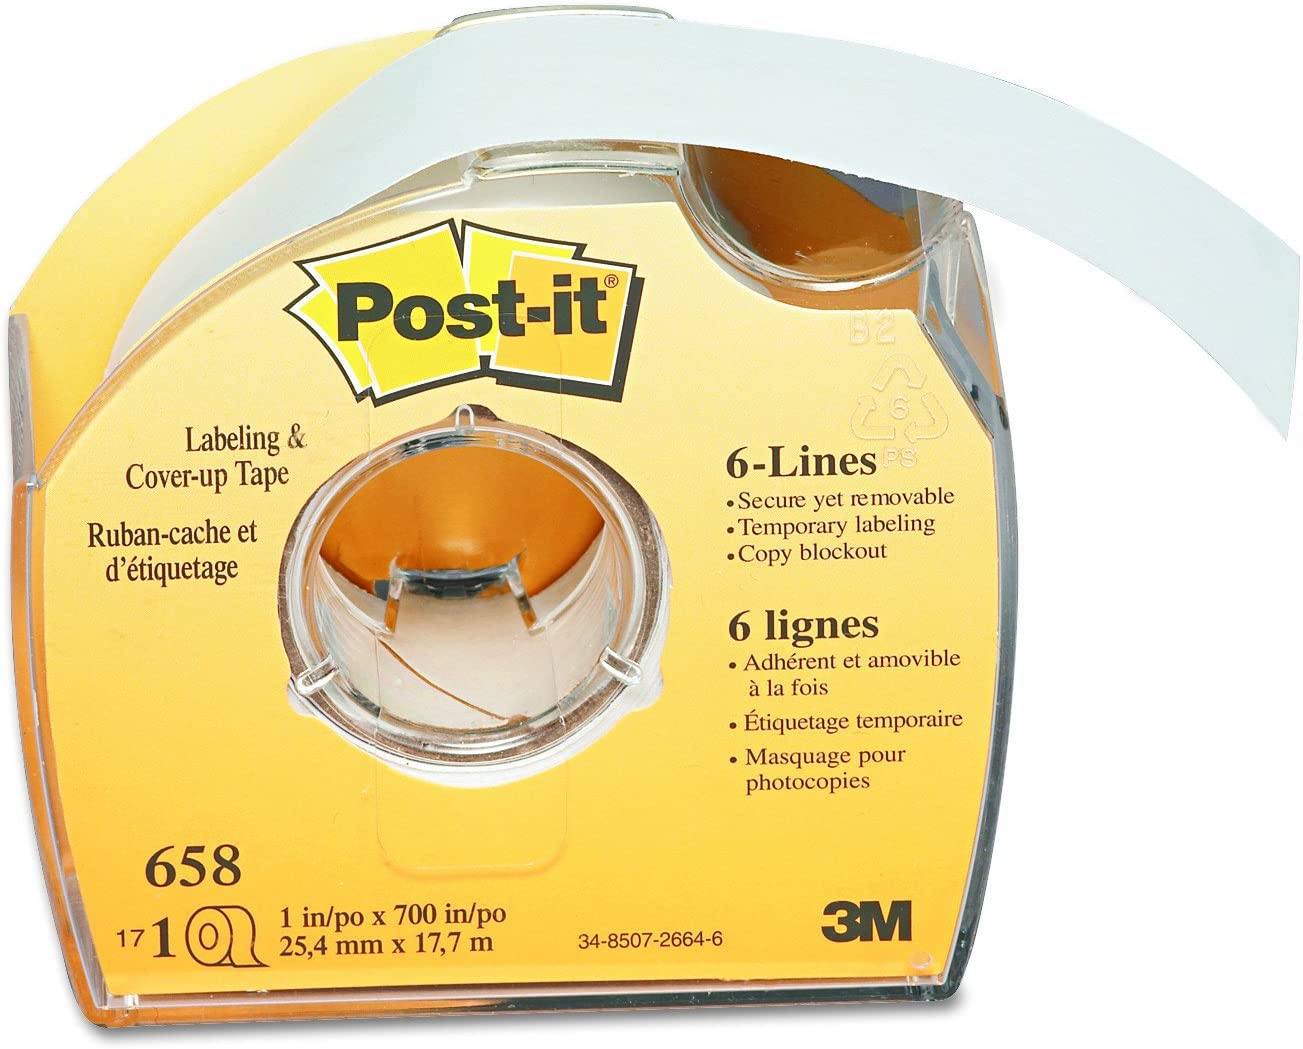 Post-it Labeling & Cover-Up Tape\ 1 Roll\ 1 in x 700 in (658)